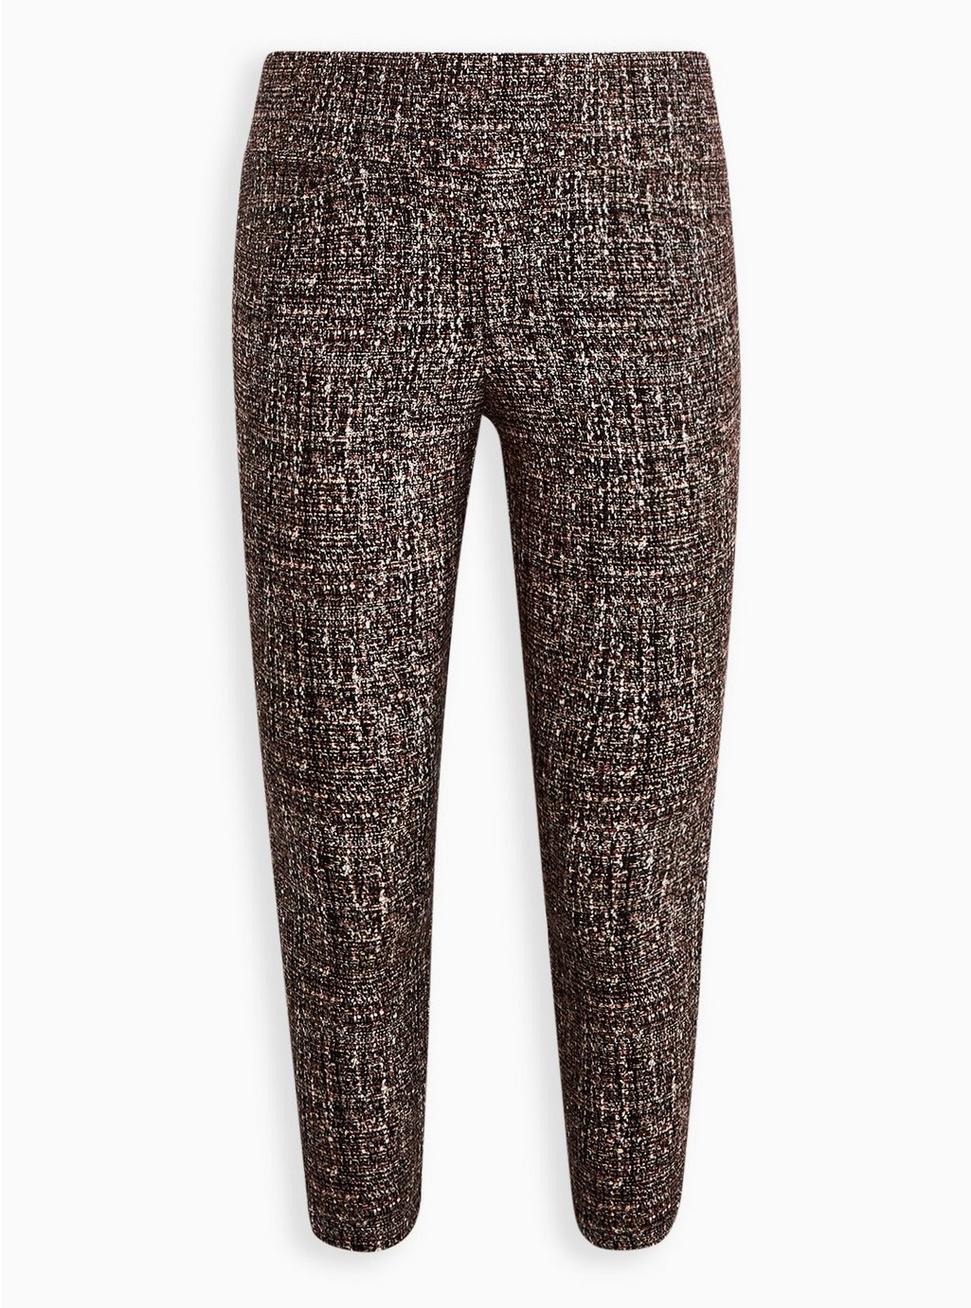 Pocket Pixie Skinny Studio Luxe Ponte High-Rise Pant, BOUCLE, hi-res